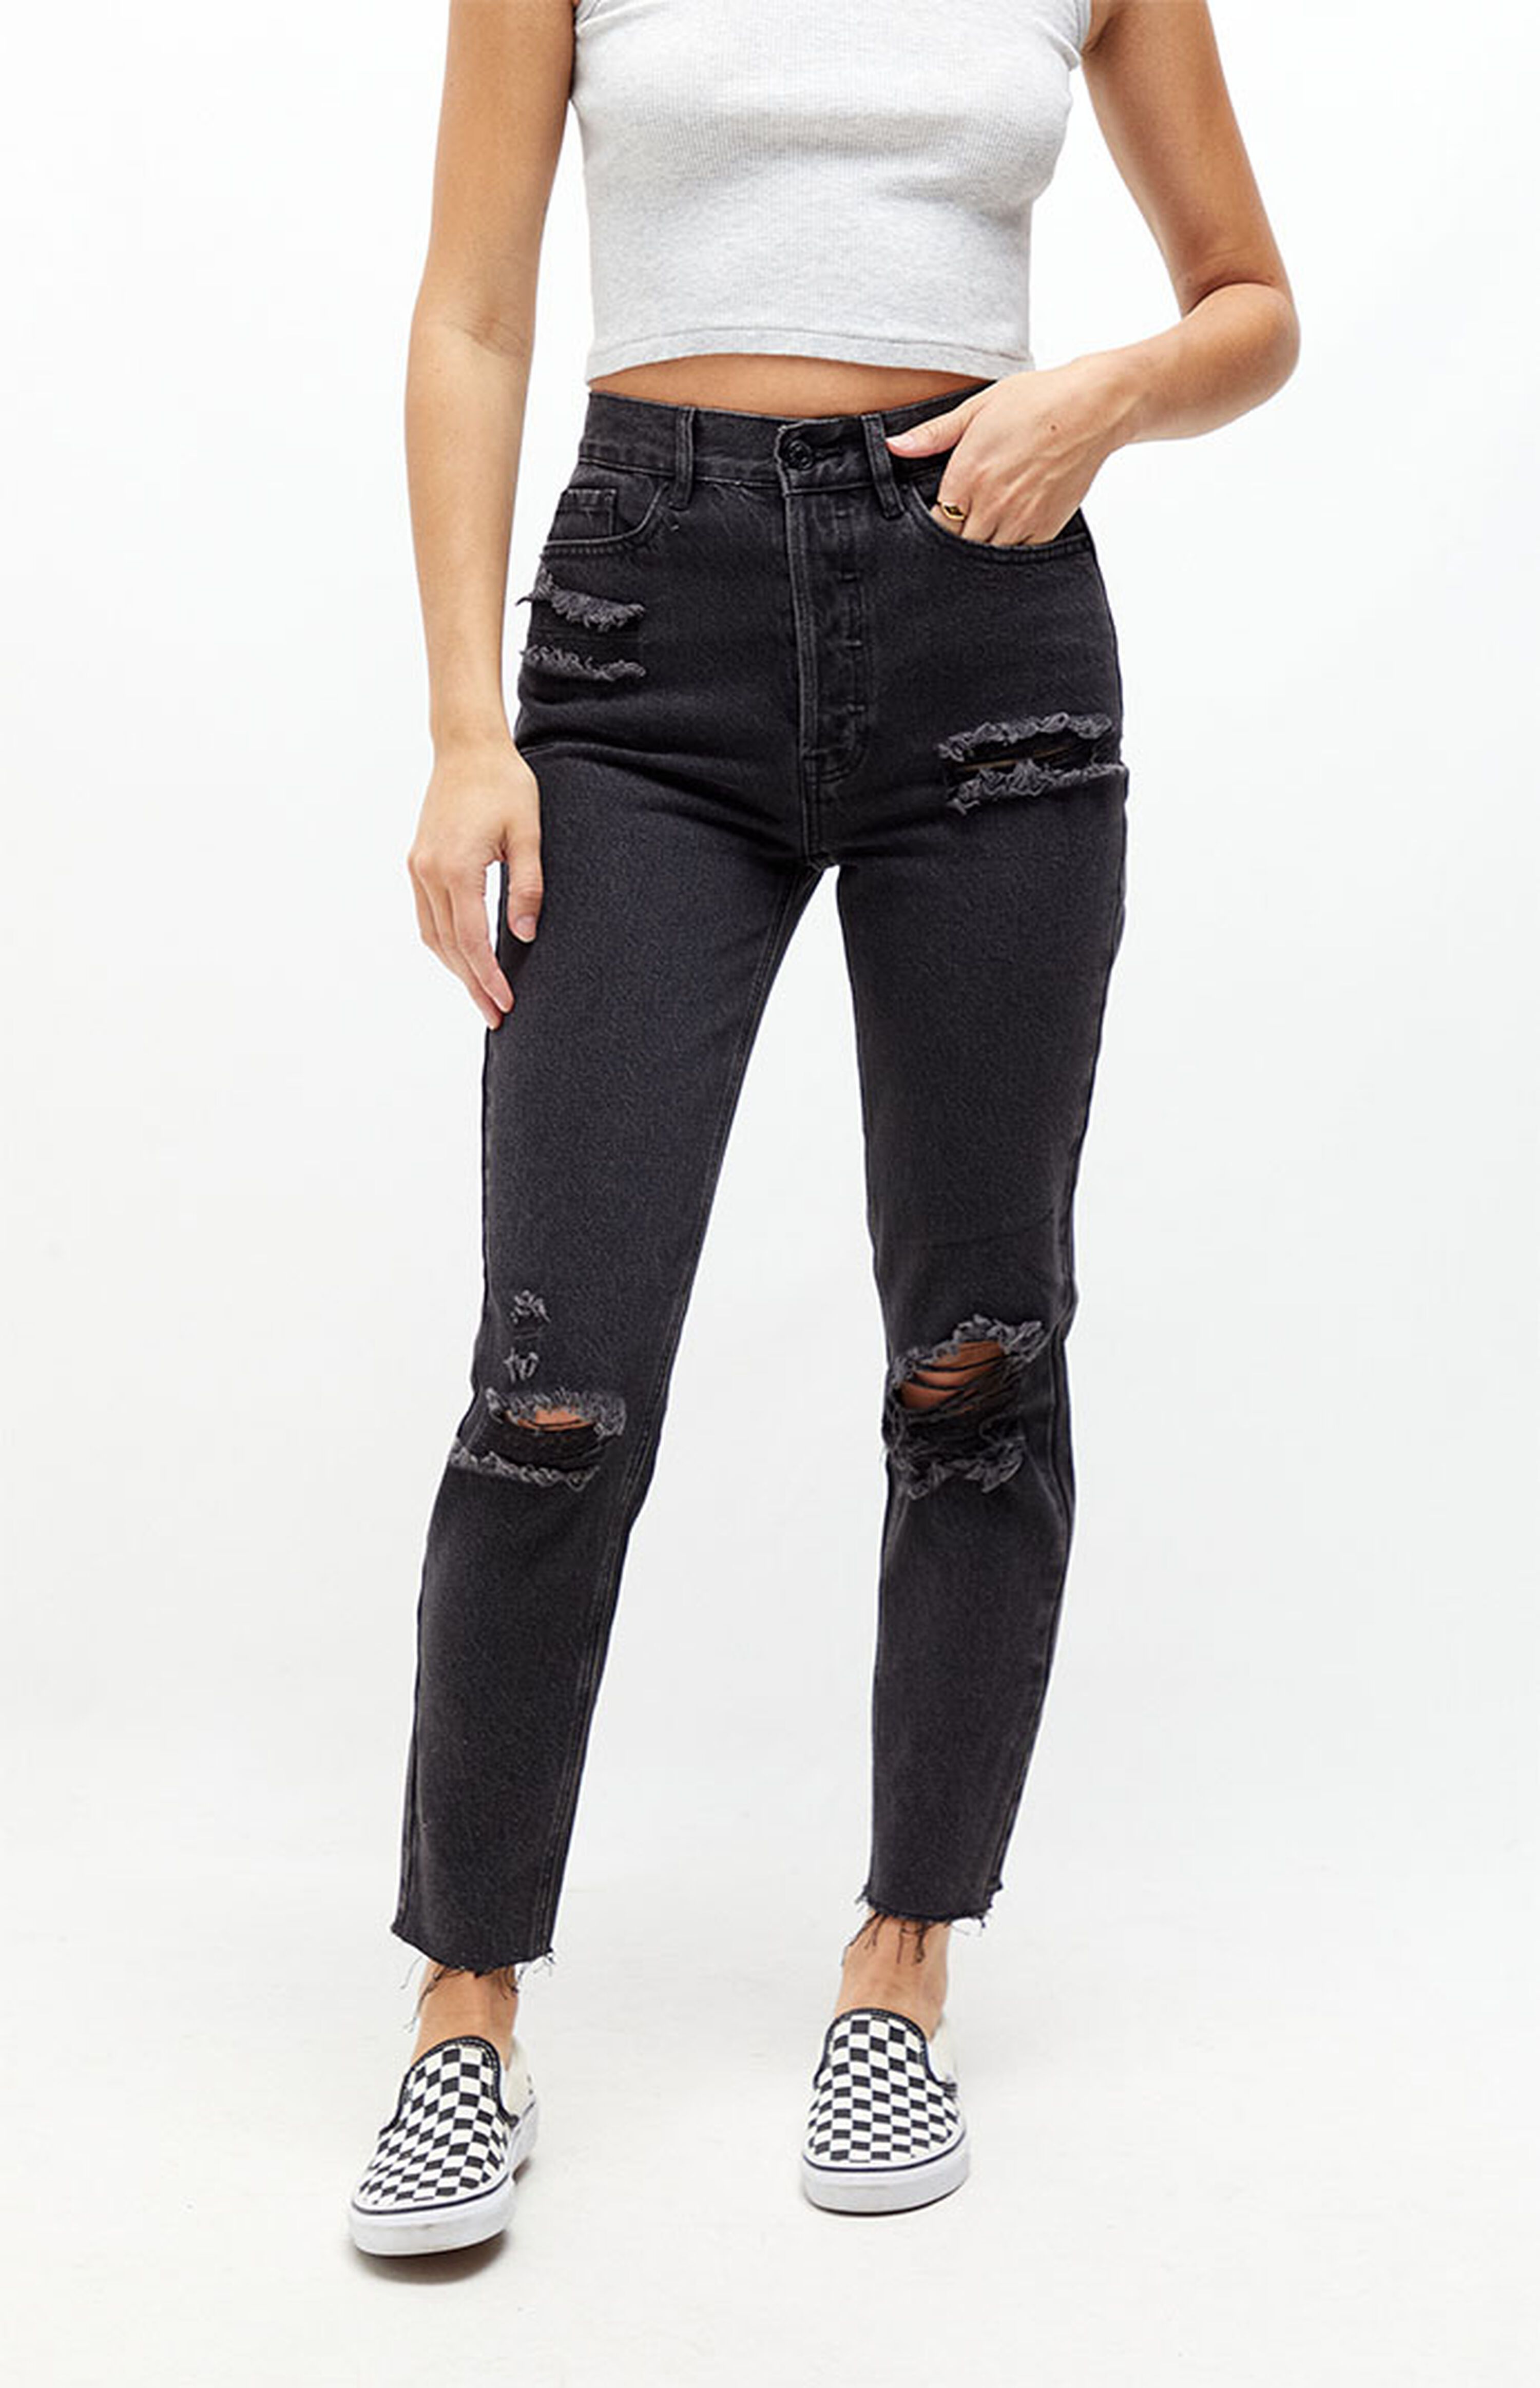 PacSun Eco Black Distressed Ultra High Waisted Slim Fit Jeans | PacSun | PacSun